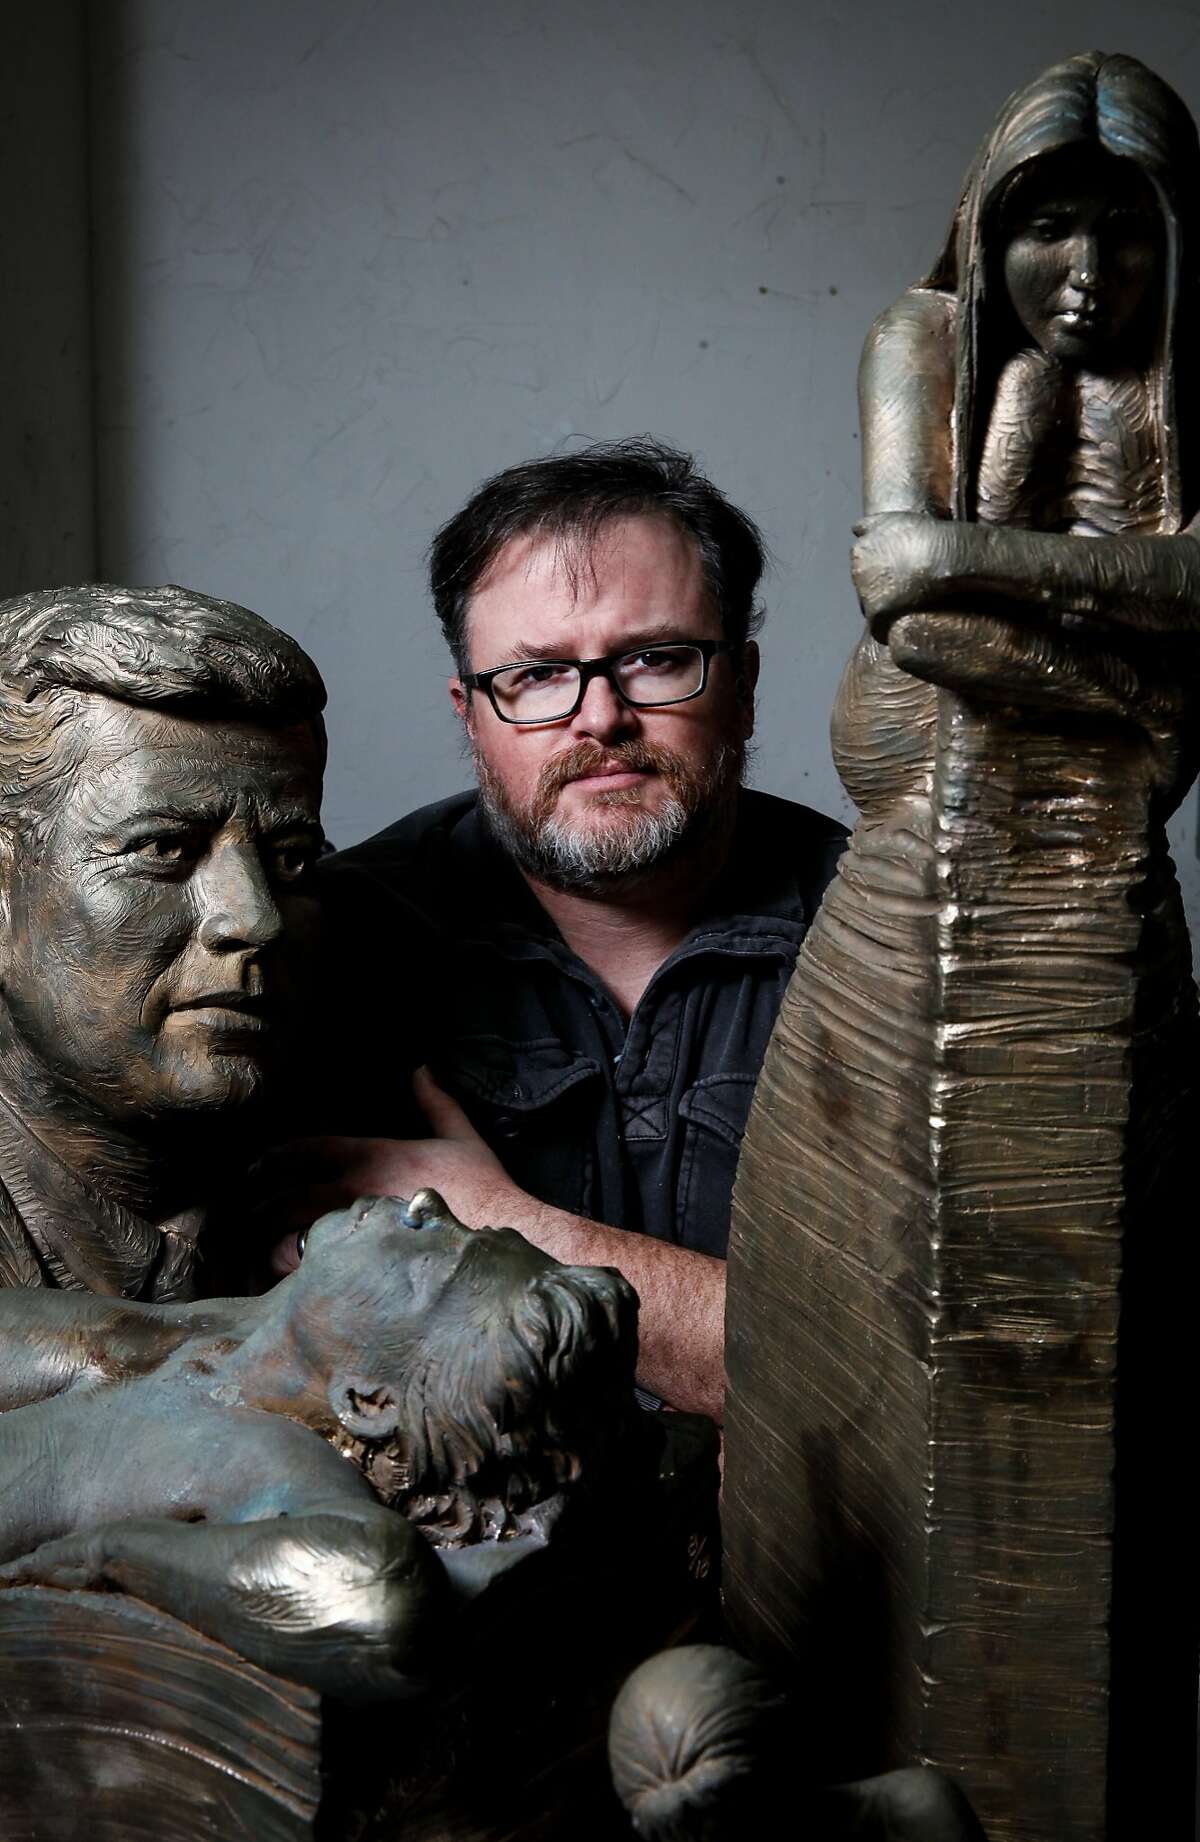 Sculptor Steven Whyte in his studio with some of his bronze sculptures in Carmel, Calif., Tuesday, November 17, 2015.